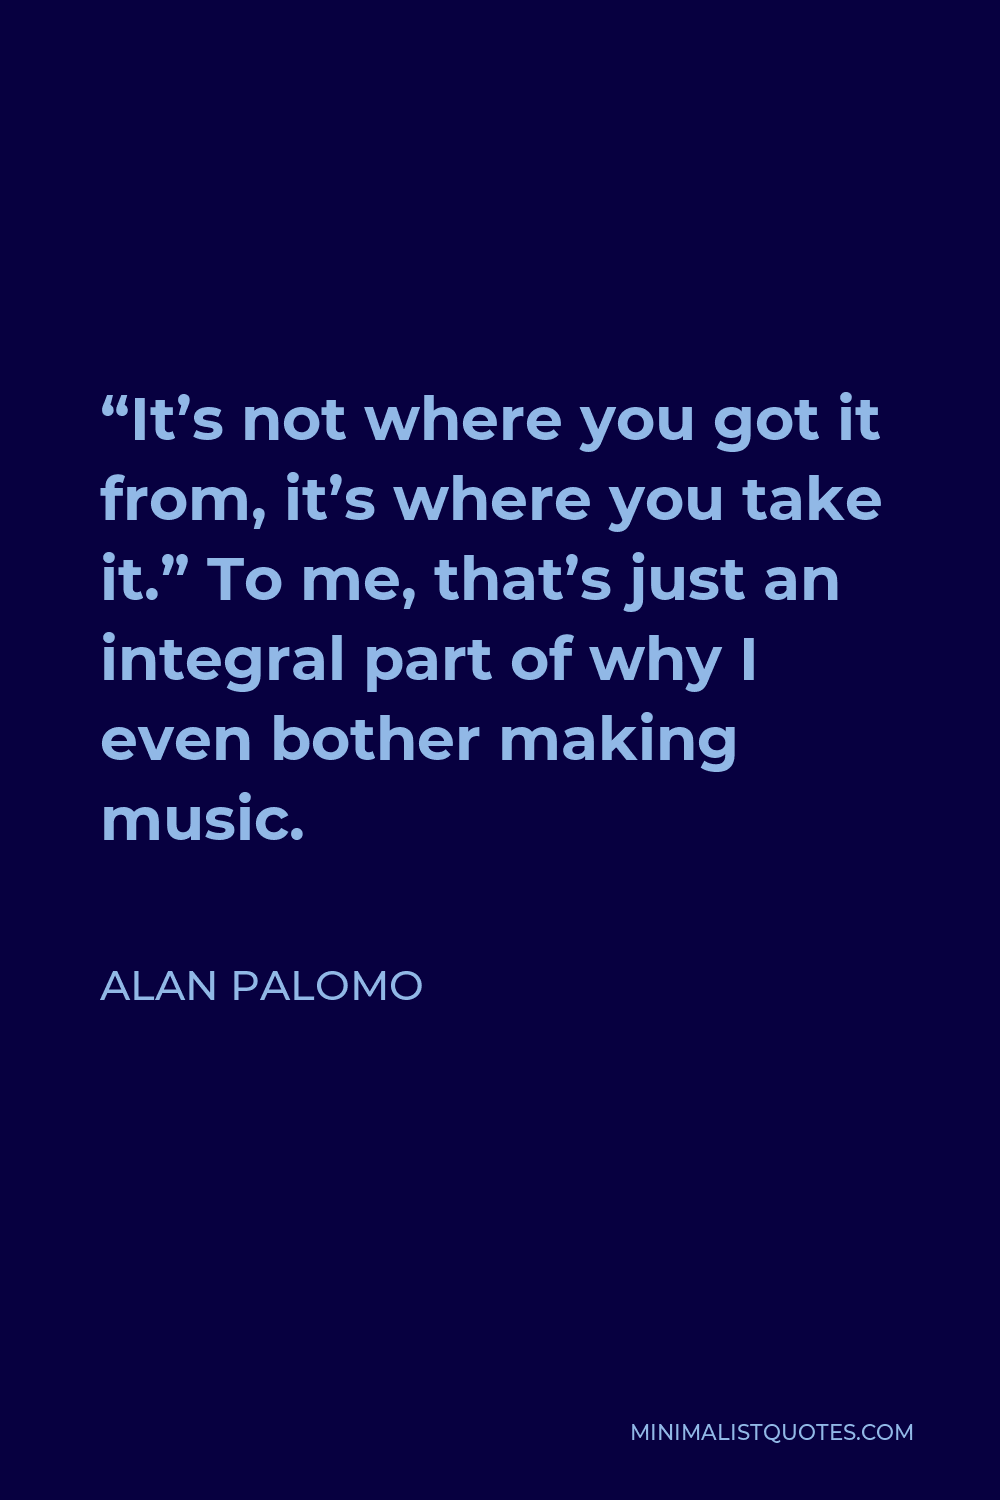 Alan Palomo Quote - “It’s not where you got it from, it’s where you take it.” To me, that’s just an integral part of why I even bother making music.